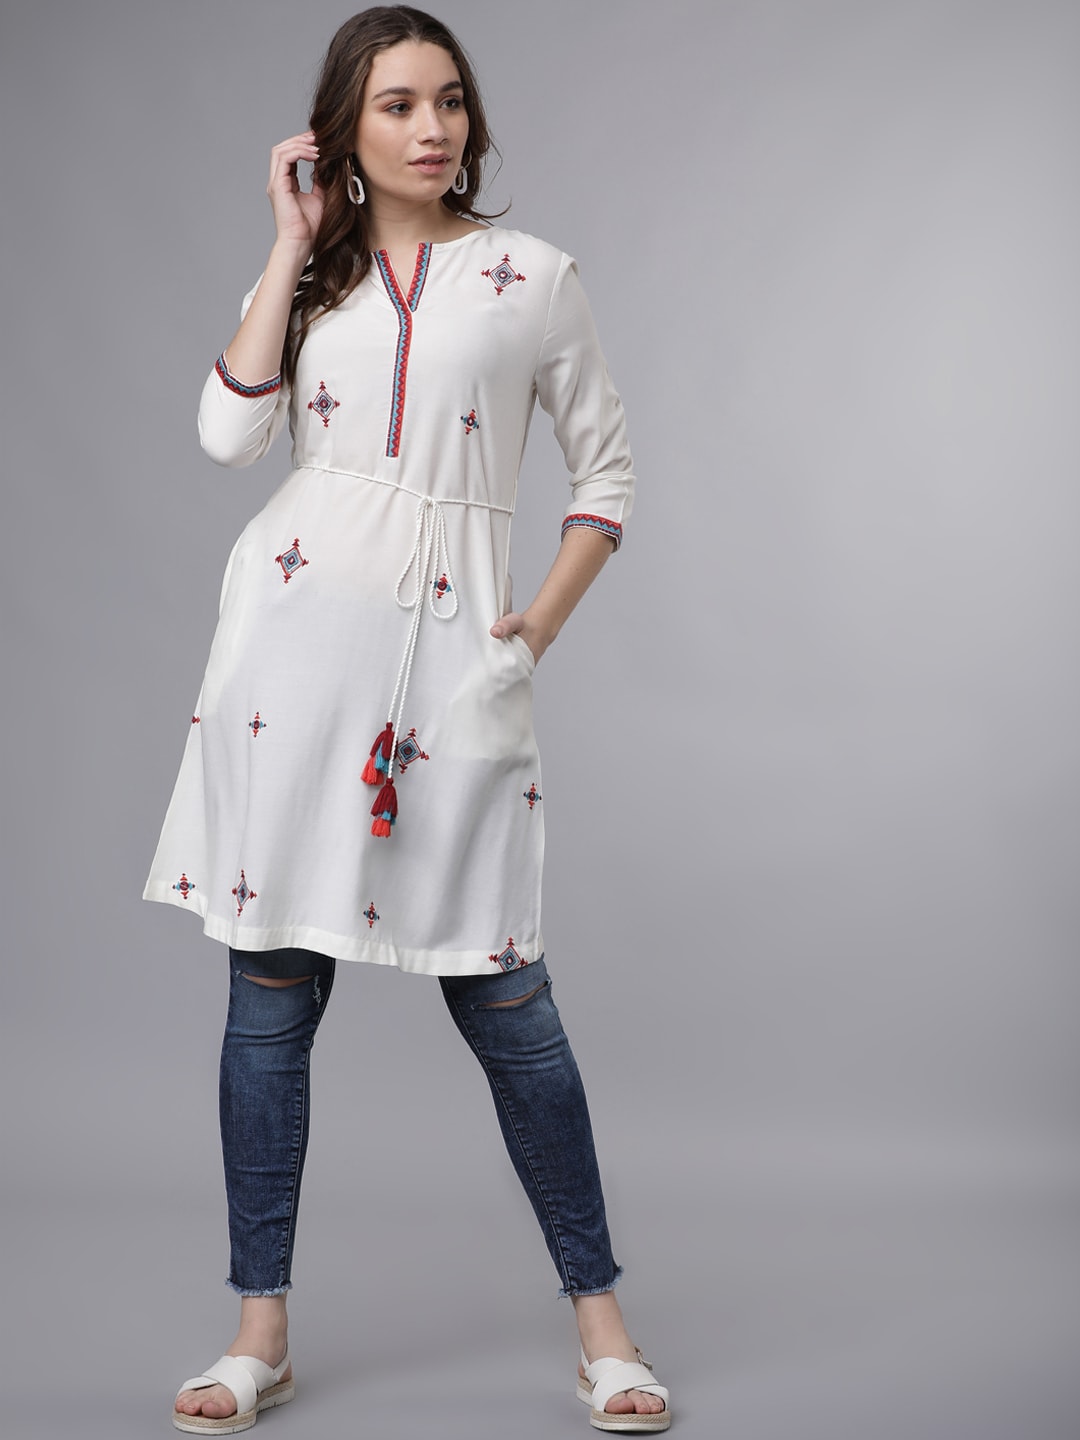 Vishudh Women's White & Red Embroidered Tunic Price in India